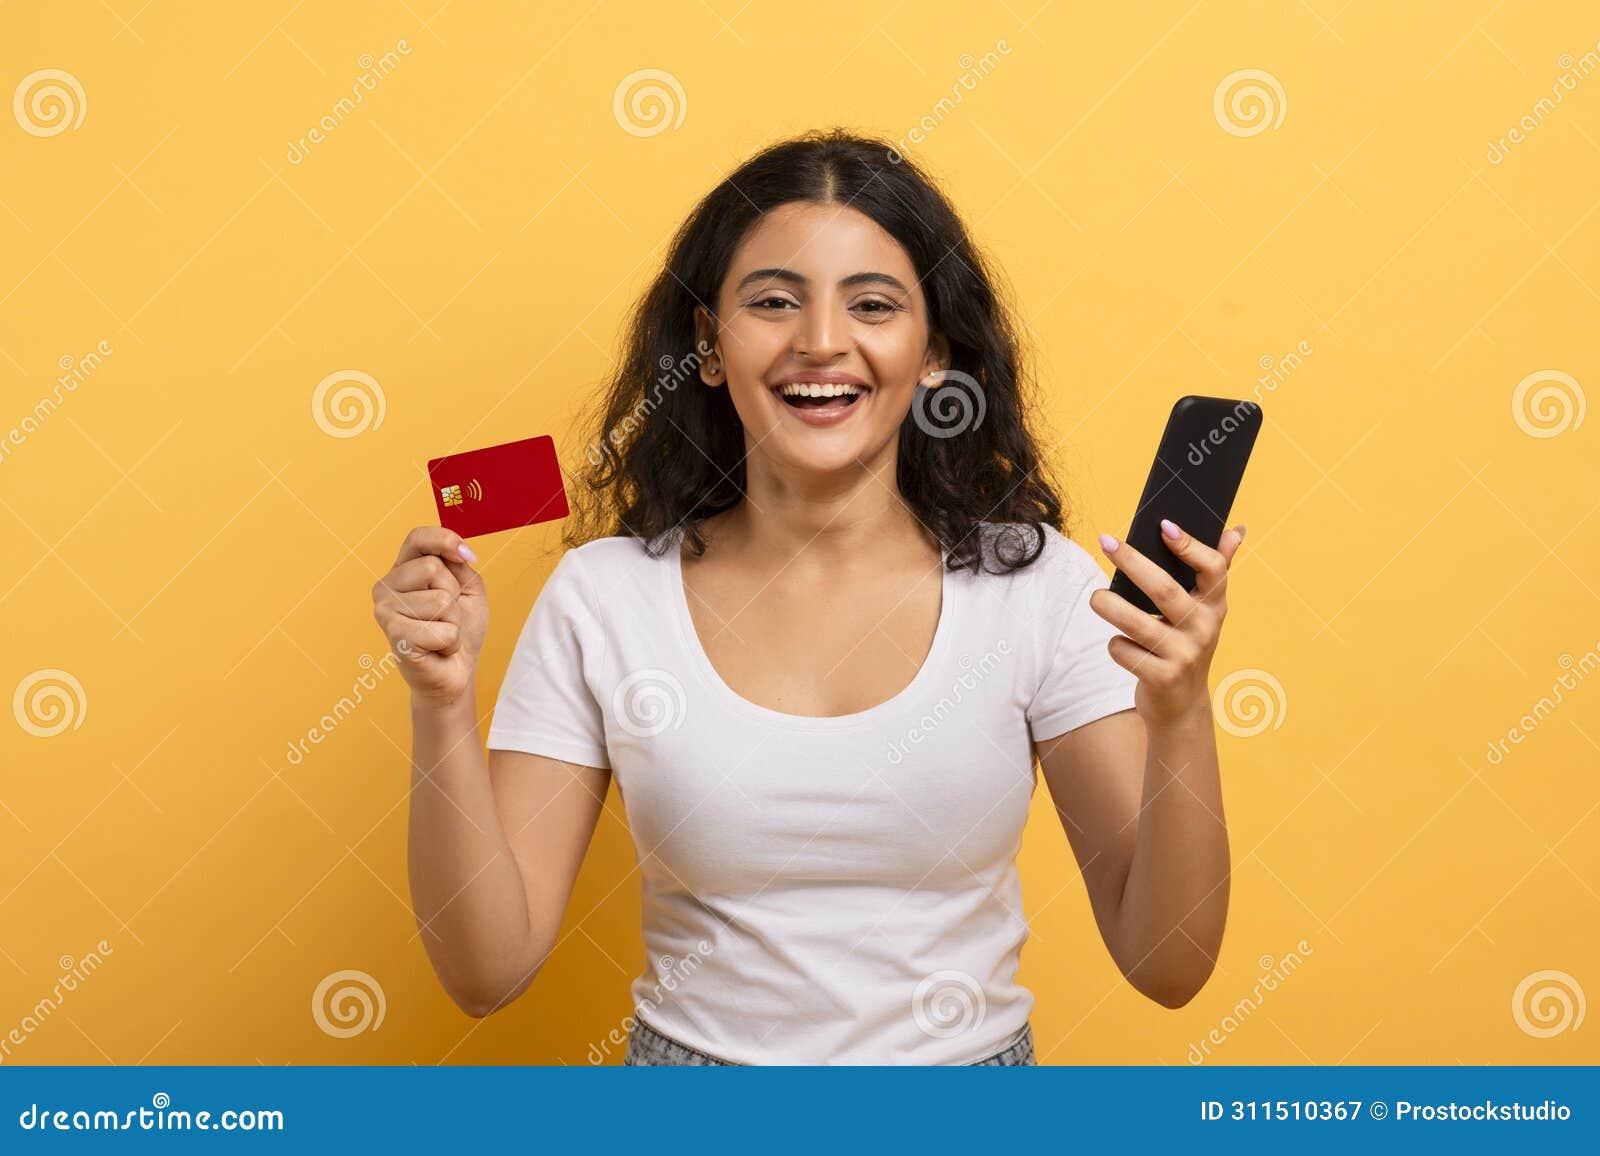 cheerful woman holding phone and credit card